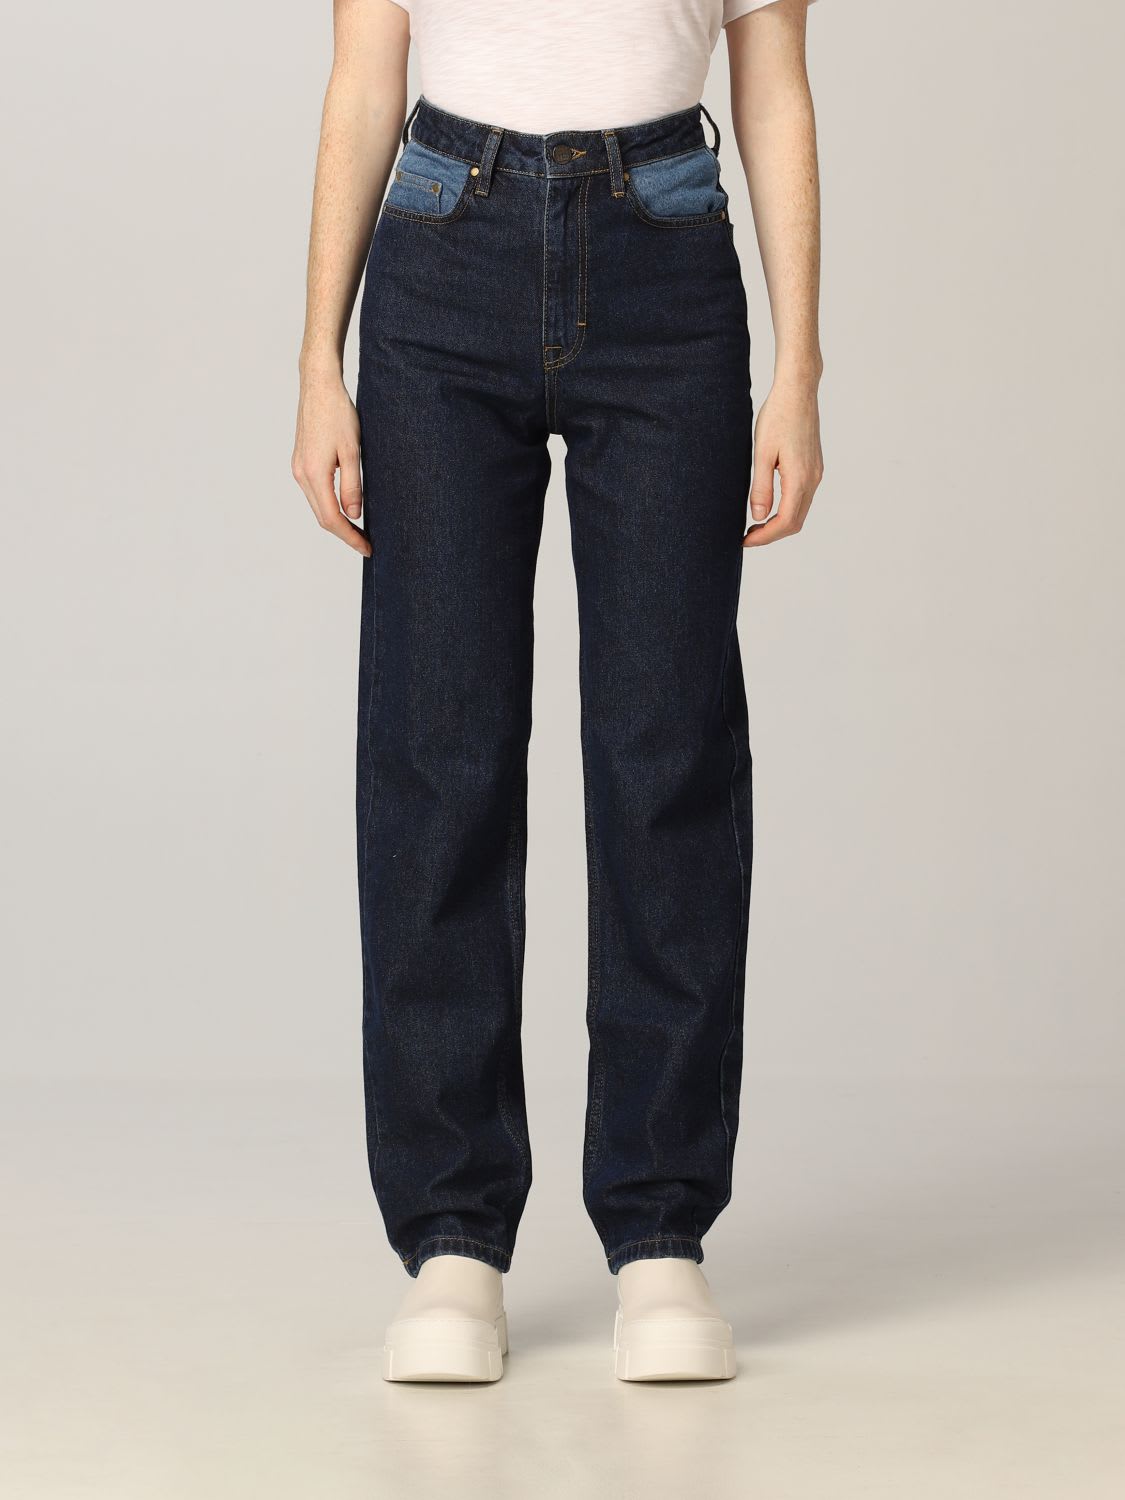 Rotate by Birger Christensen Rotate Jeans Jeans Women Rotate